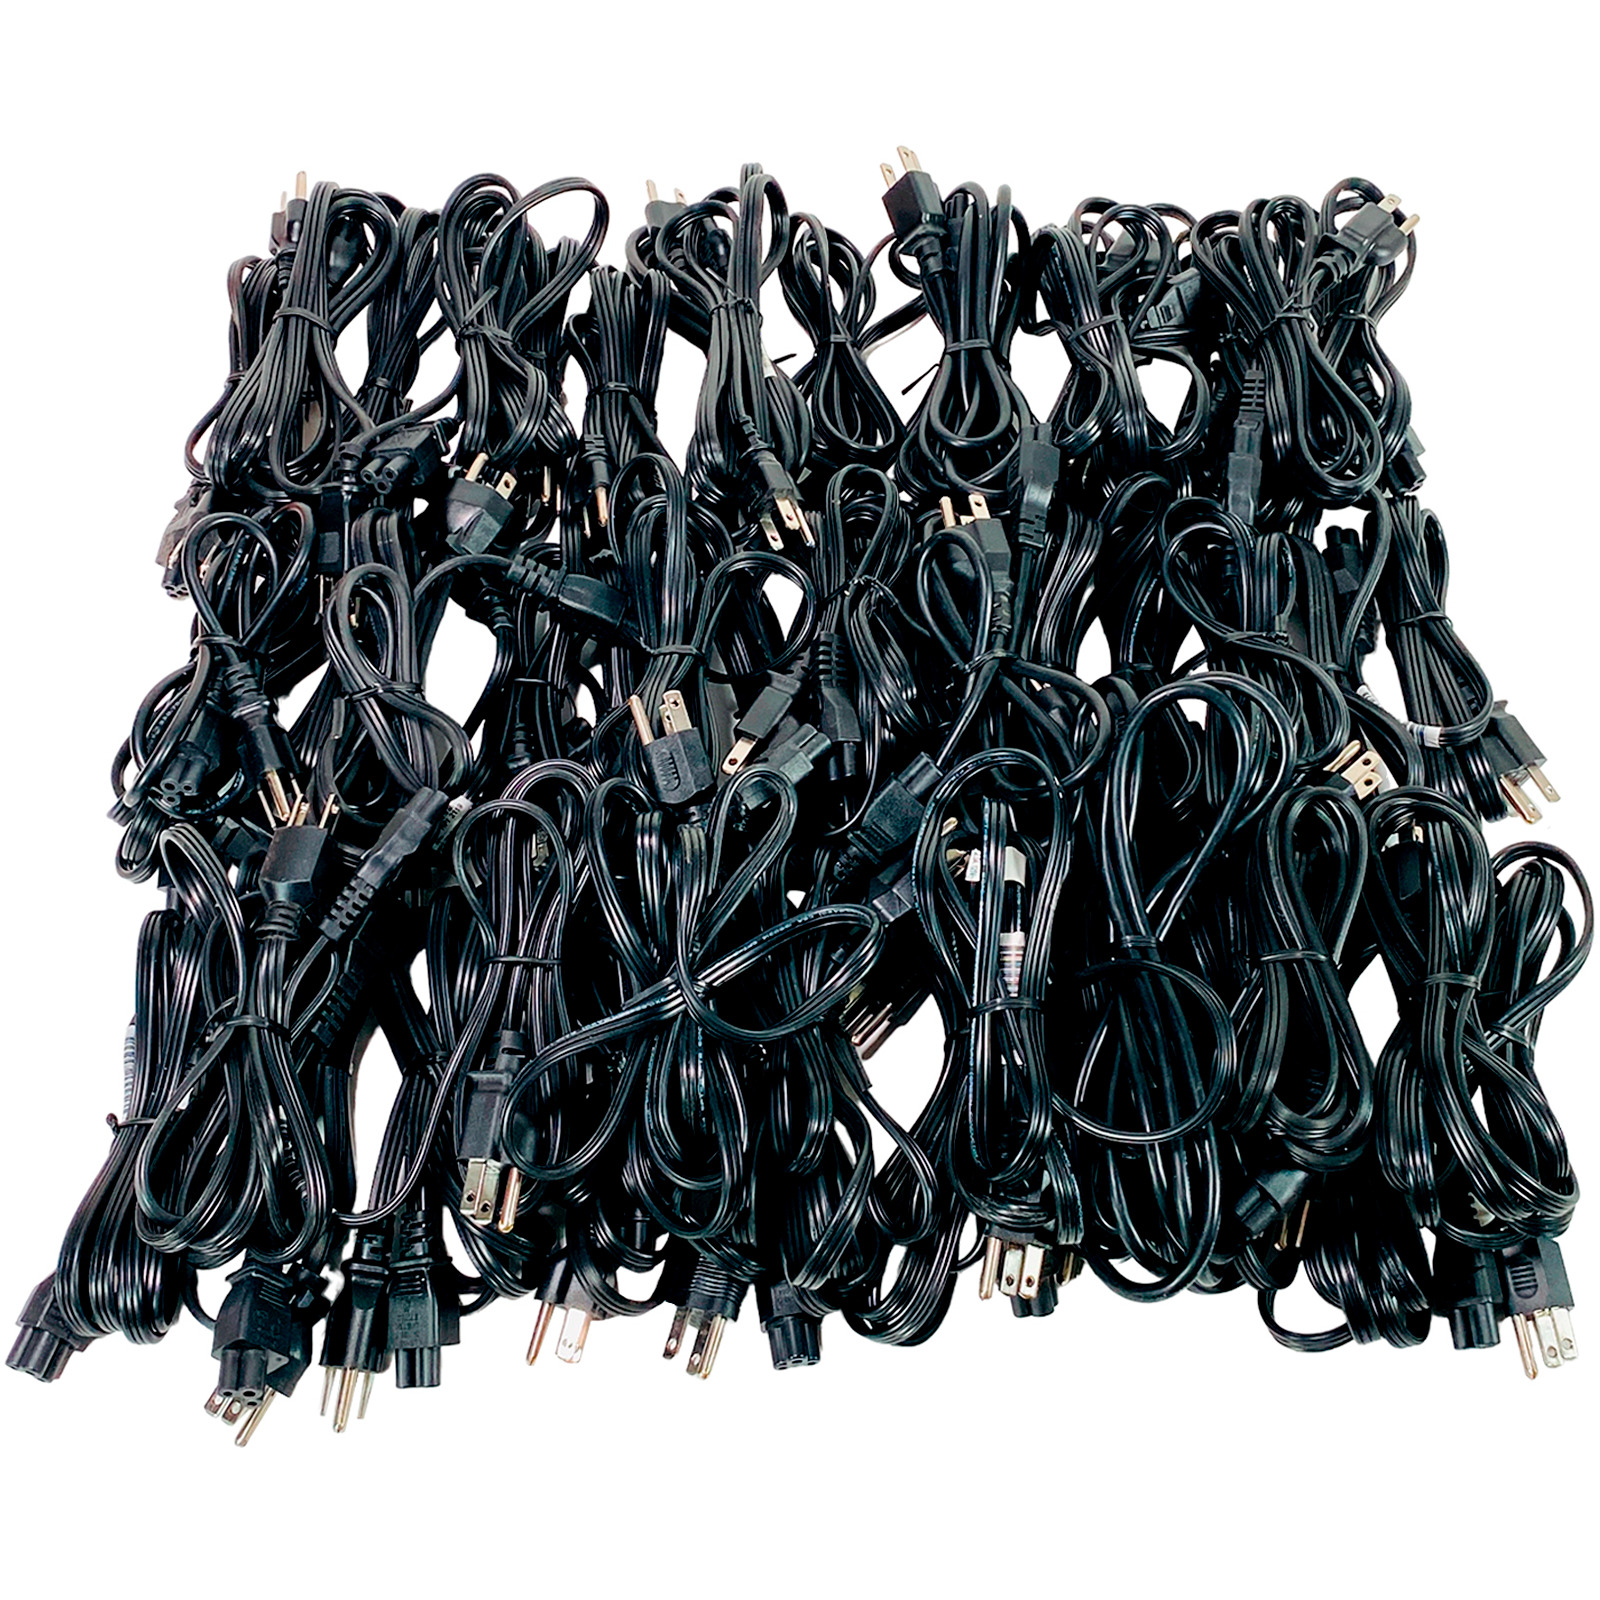 LOT 50 6ft High Quality 3 Prong IEC C5 AC Power Cord Laptop PC Printers Charge